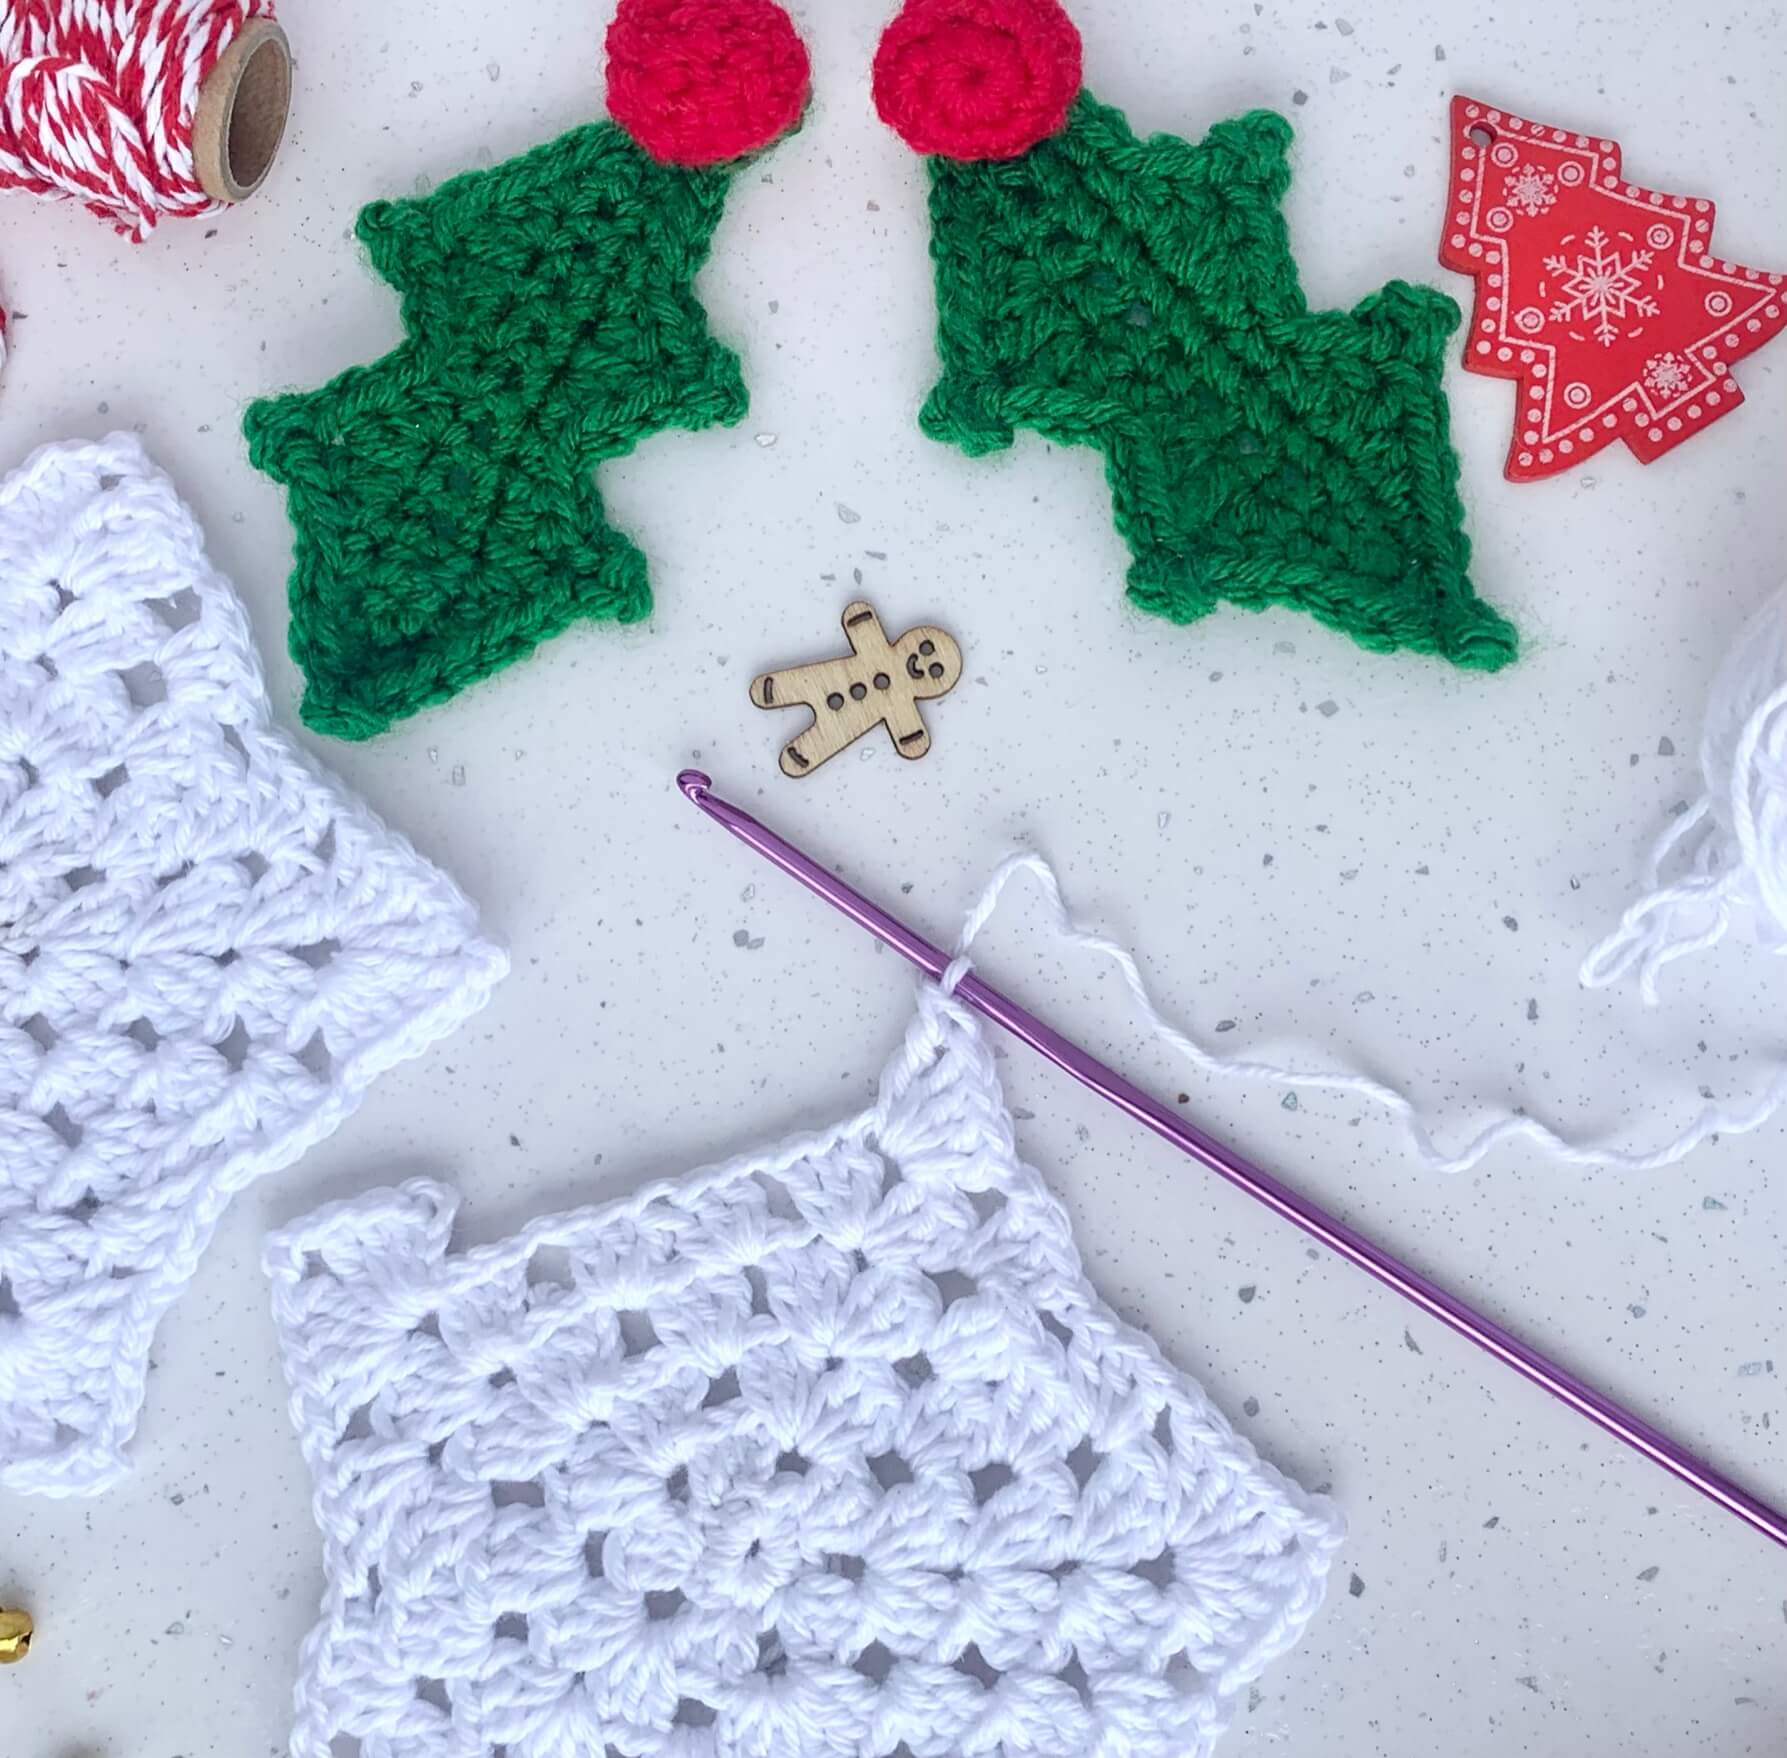 How to crochet a 5 point Granny Star